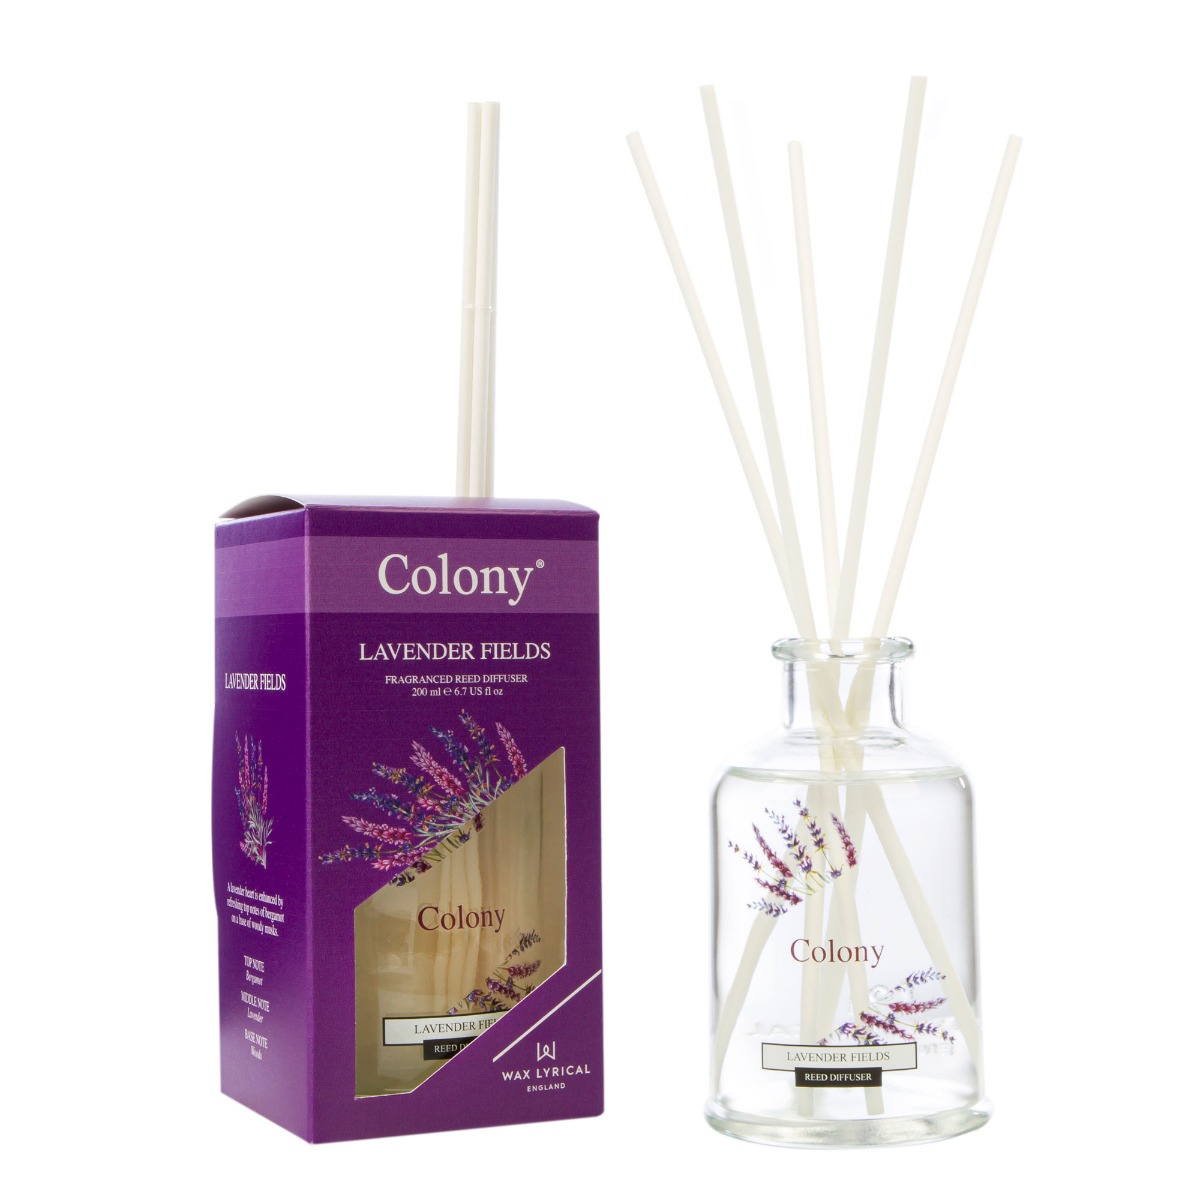 Colony Lavender Fields Reed Diffuser image number null